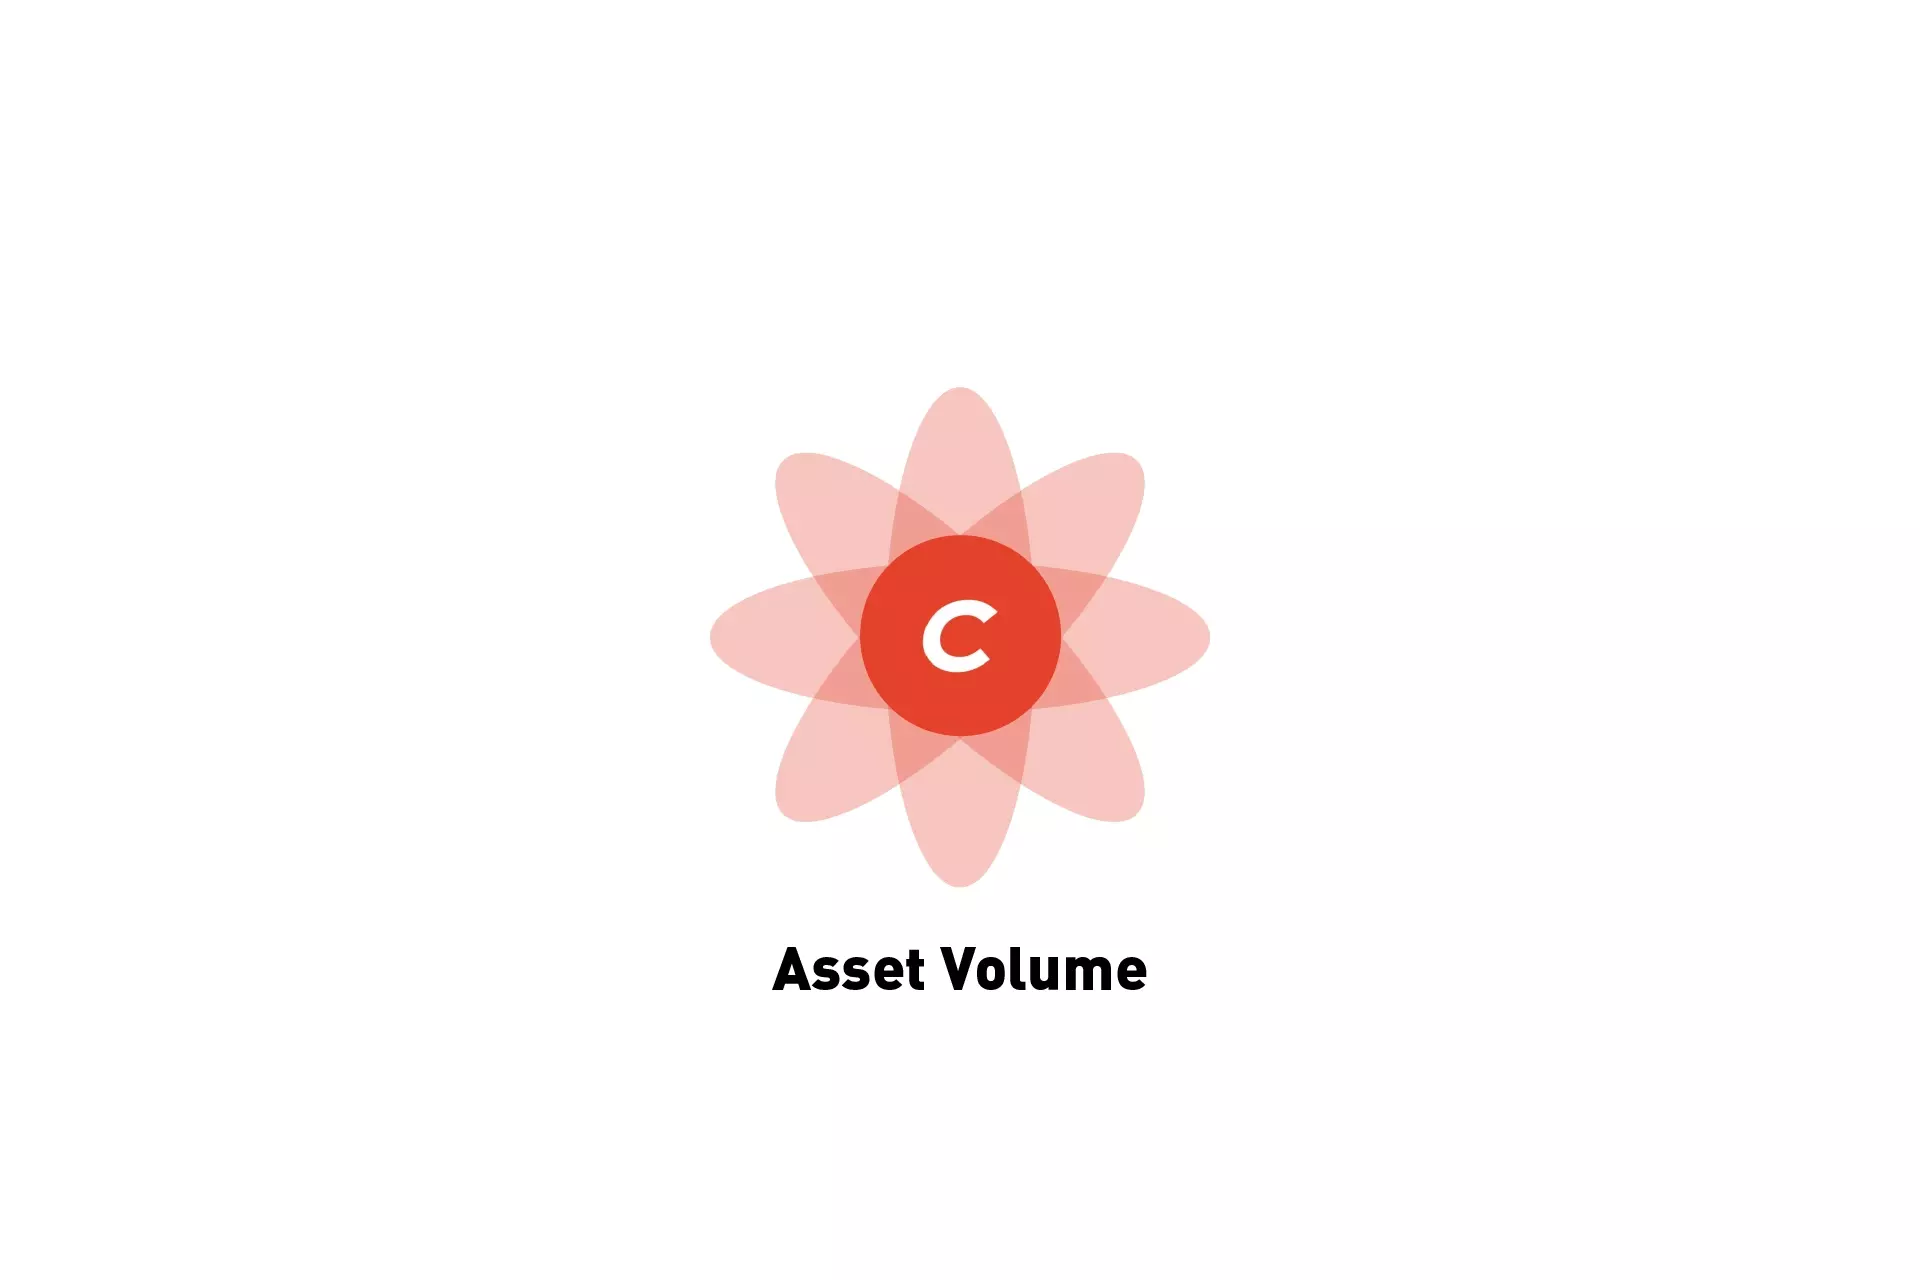 A flower that represents Craft CMS with the text "Asset Volume" beneath it.